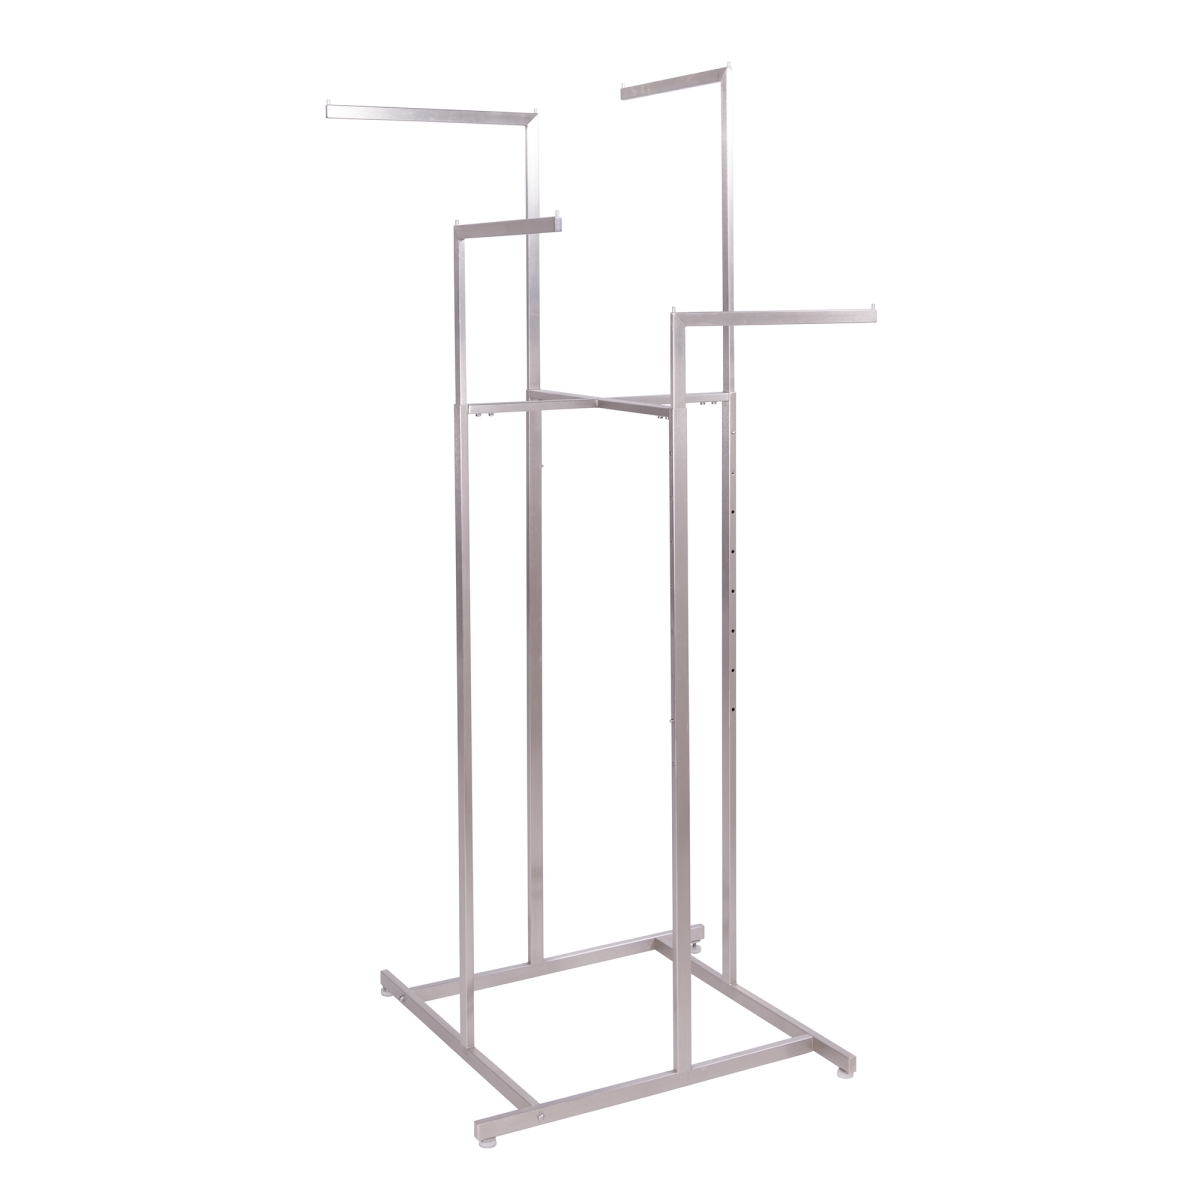 Picture of Econoco BQ4W 4-Way Rack with Straight Arms, Satin Nickel